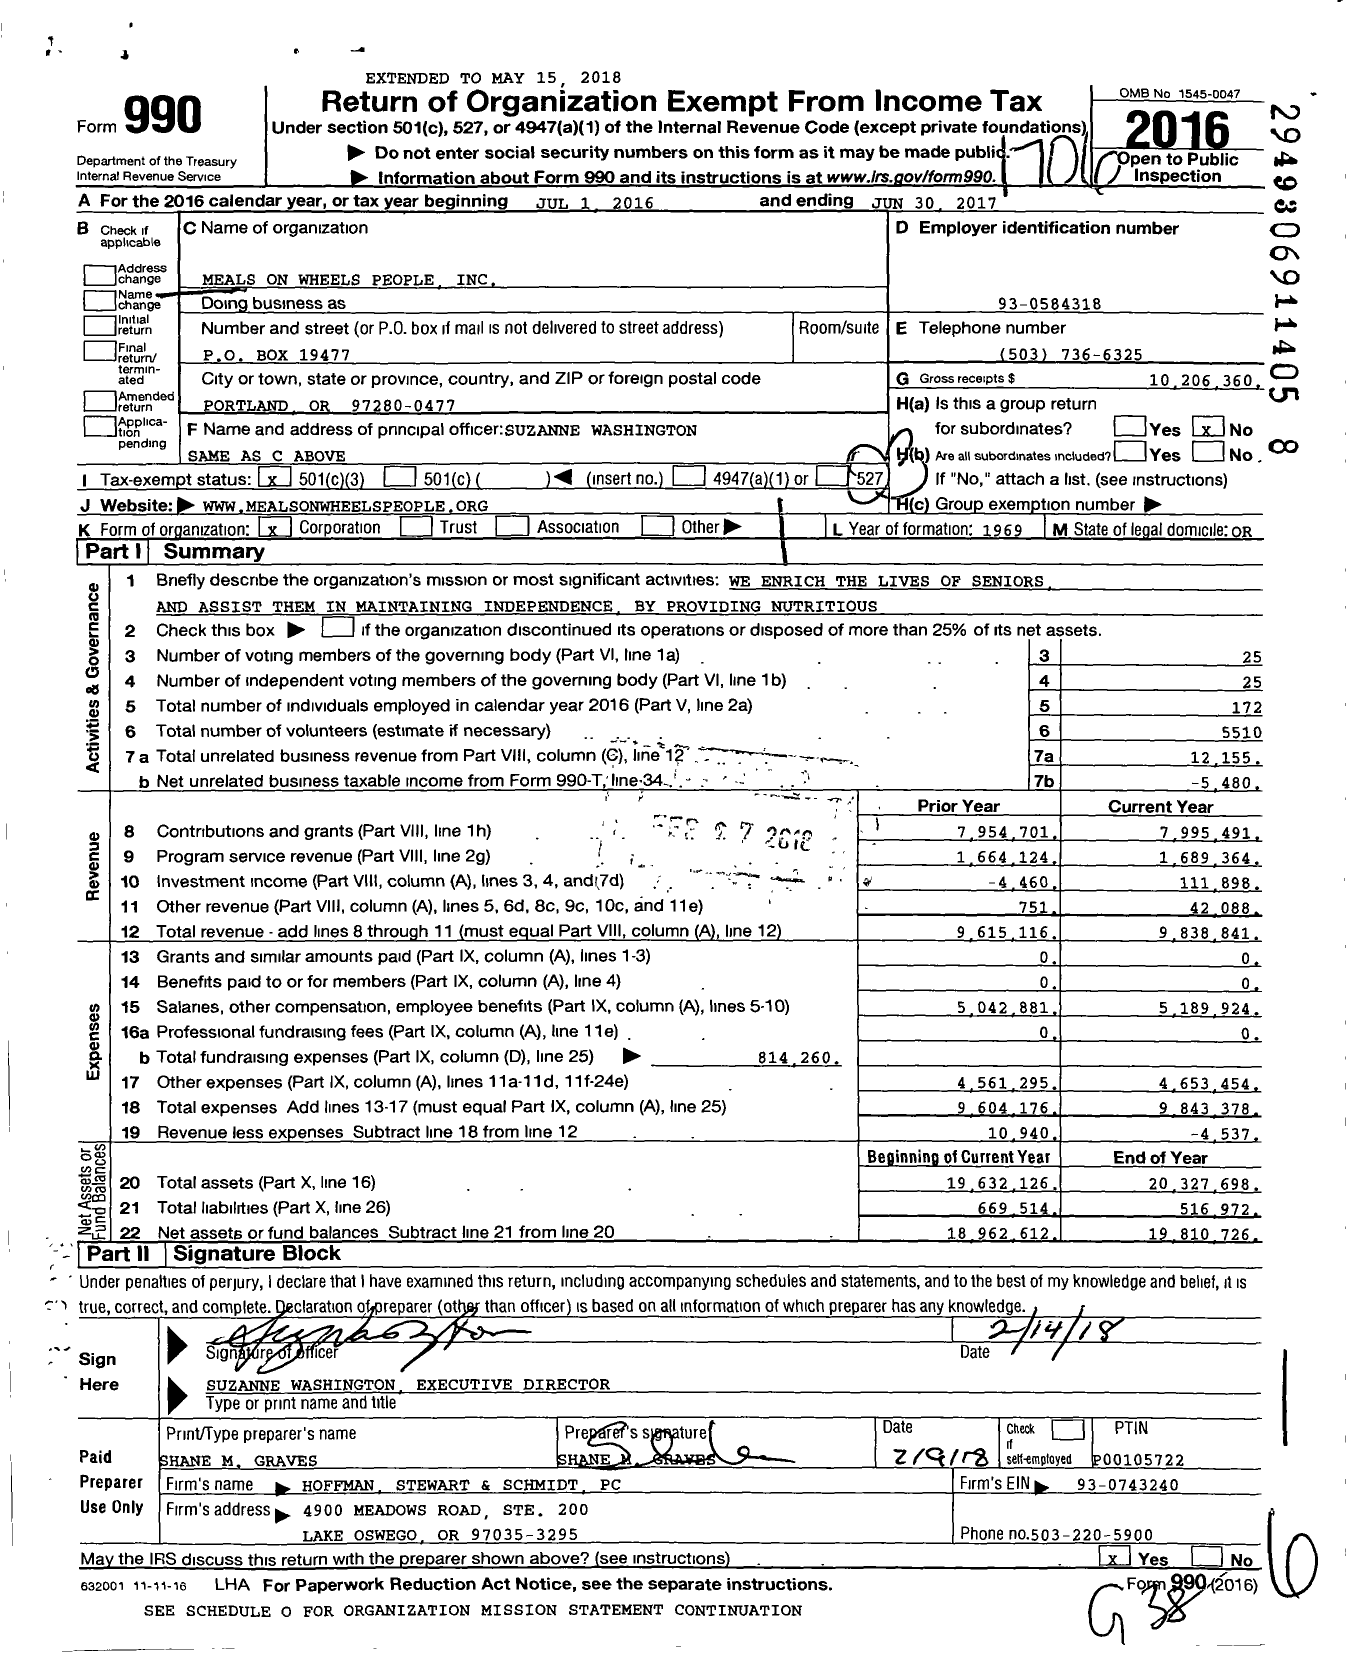 Image of first page of 2016 Form 990 for Meals on Wheels People